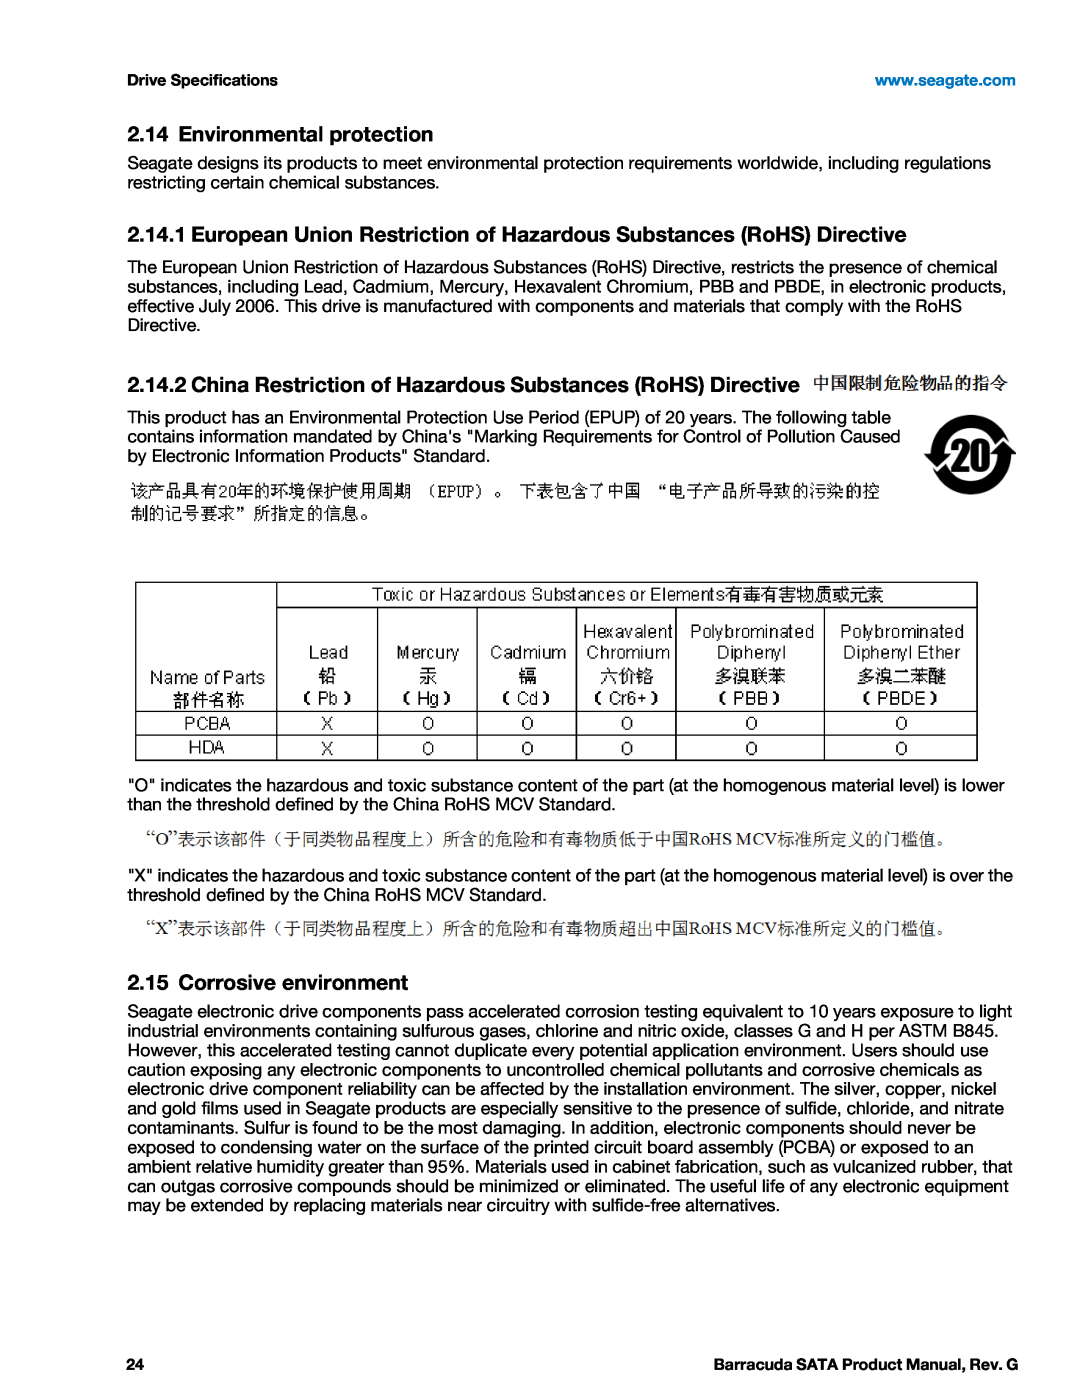 Seagate STBD3000100, STBD2000101 manual Environmental protection, China Restriction of Hazardous Substances RoHS Directive 